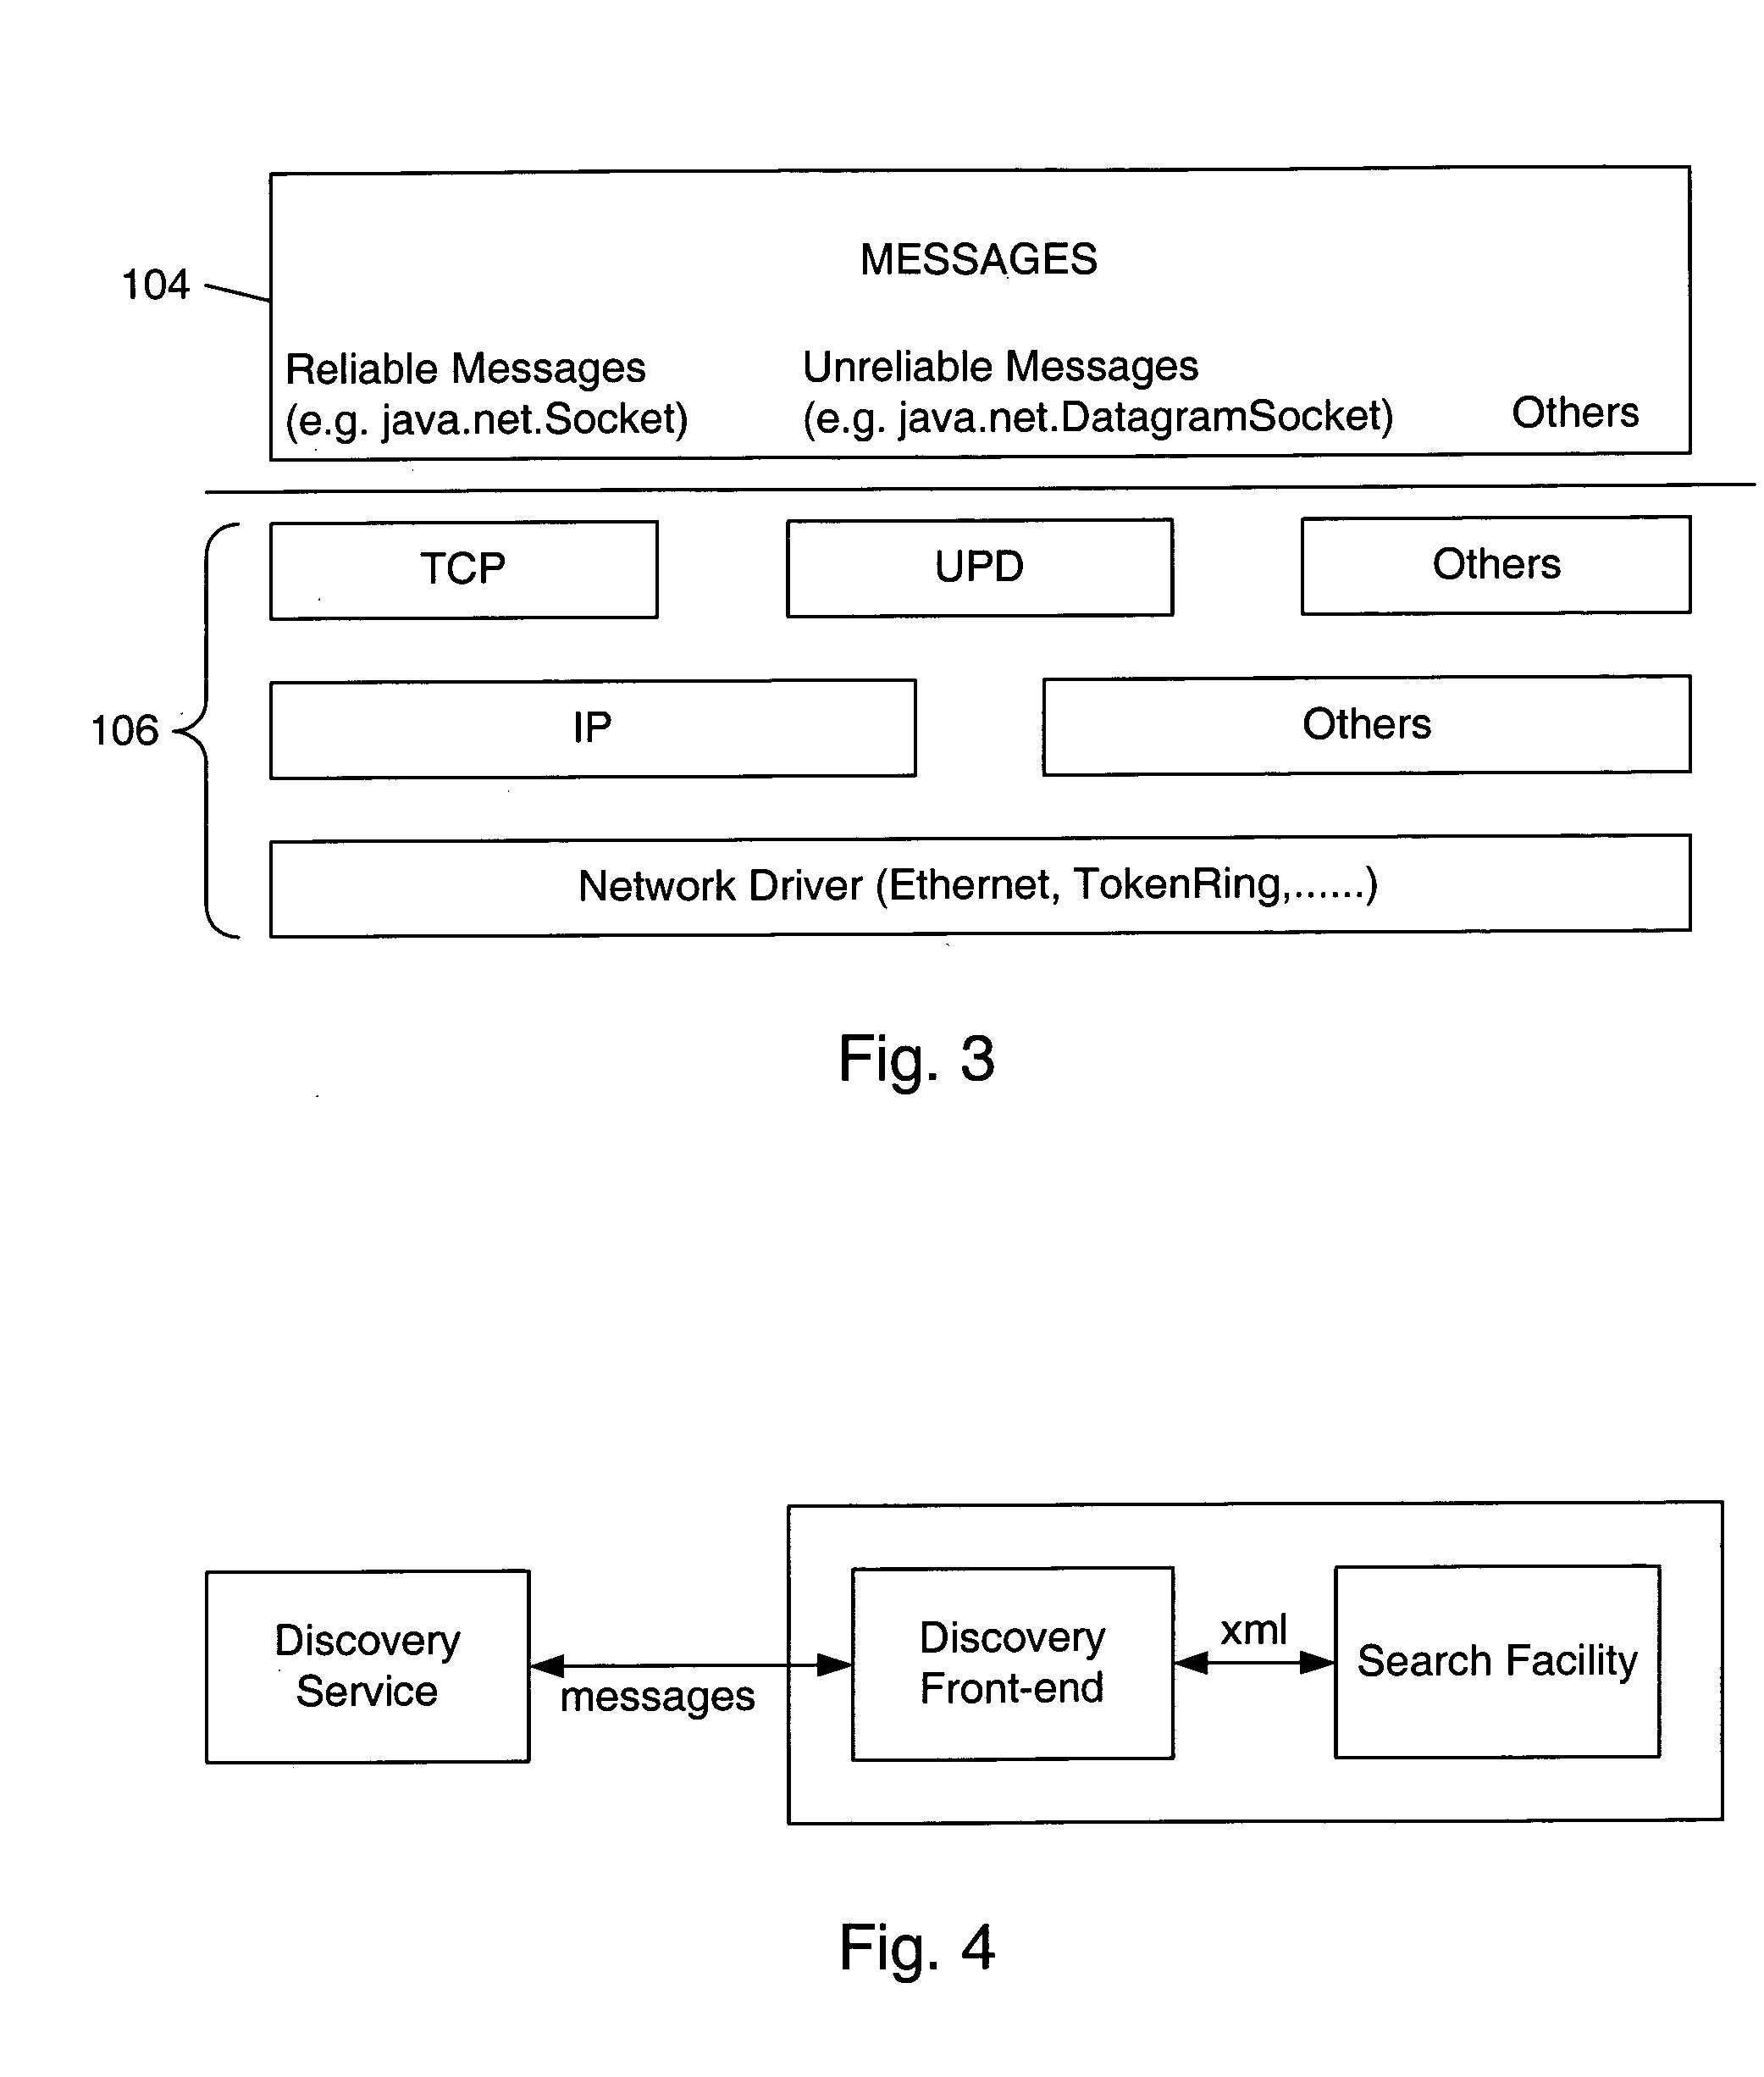 Automatic lease renewal with message gates in a distributed computing environment